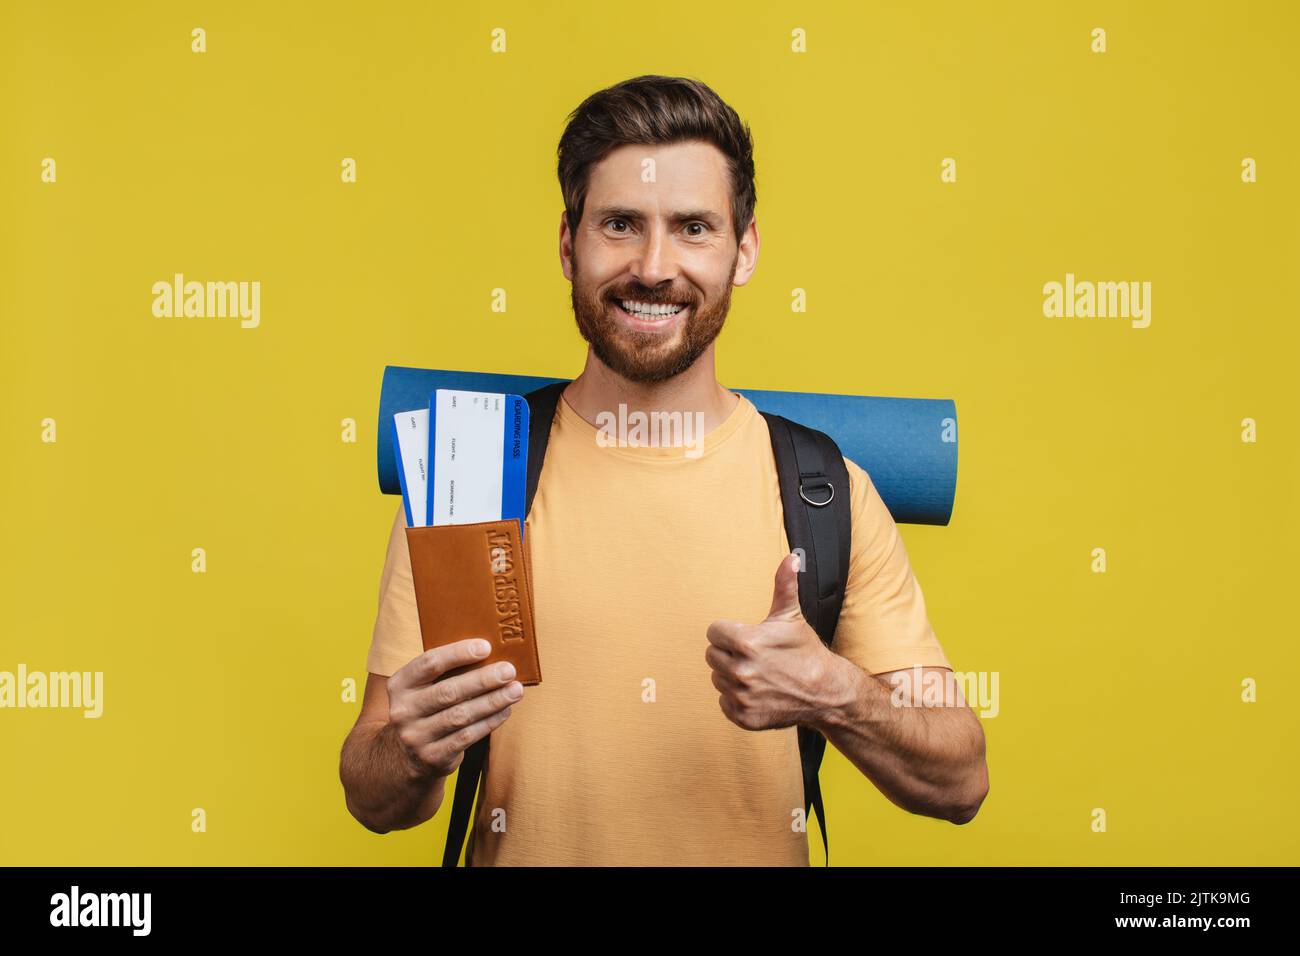 Cheap flight deals. Happy man holding tickets with passport, gesturing thumb up, standing with backpack Stock Photo